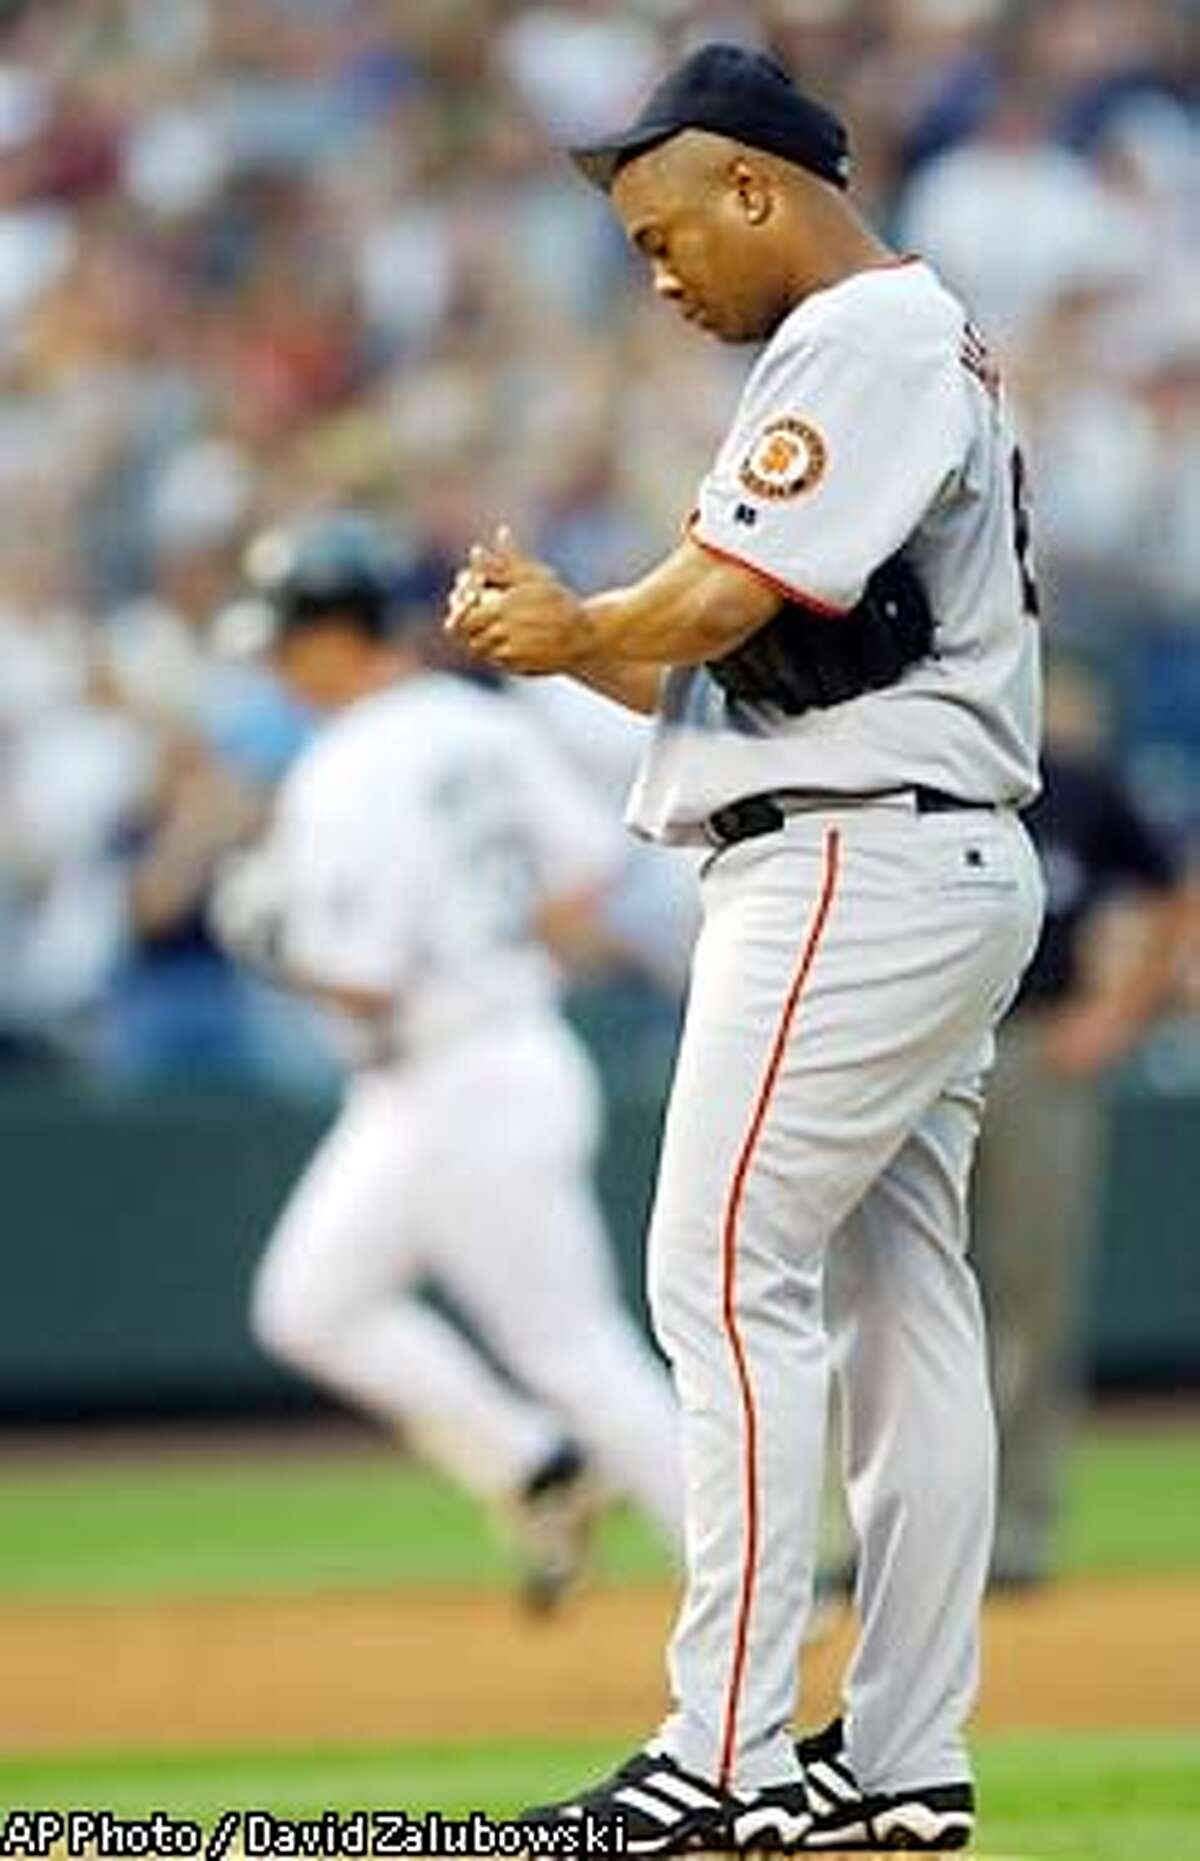 As Colorado Rockies' Larry Walker, back, circles the bases after hitting a three-run home run, San Francisco Giants starting pitcher Livan Hernandez rubs up a new ball in the second inning in Coors Field in Denver on Wednesday, July 3, 2002. Hernandez gave up seven runs in the inning before being pulled. (AP Photo/David Zalubowski)